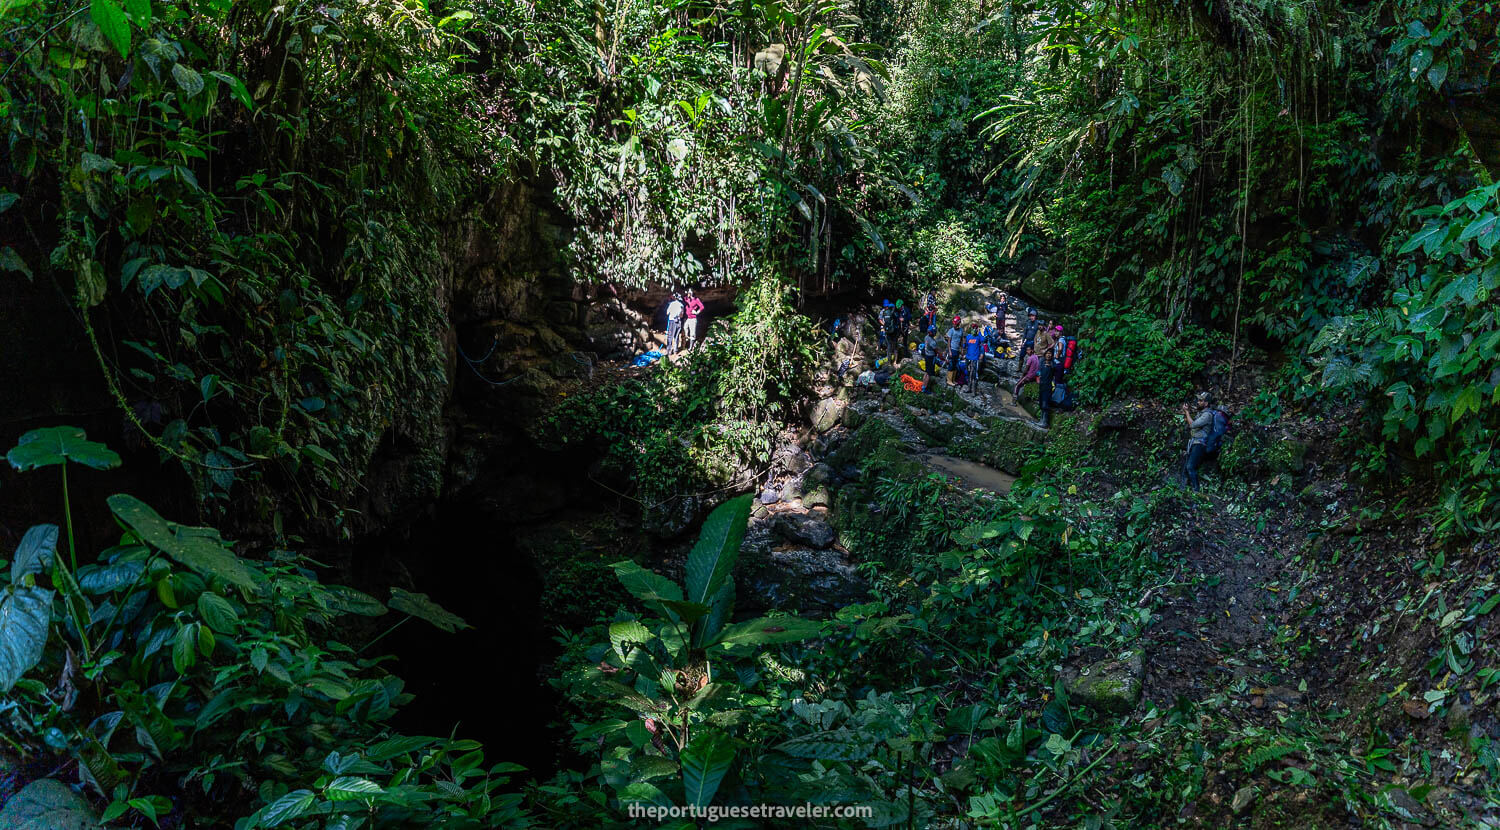 A Panorama of the cave's entrance